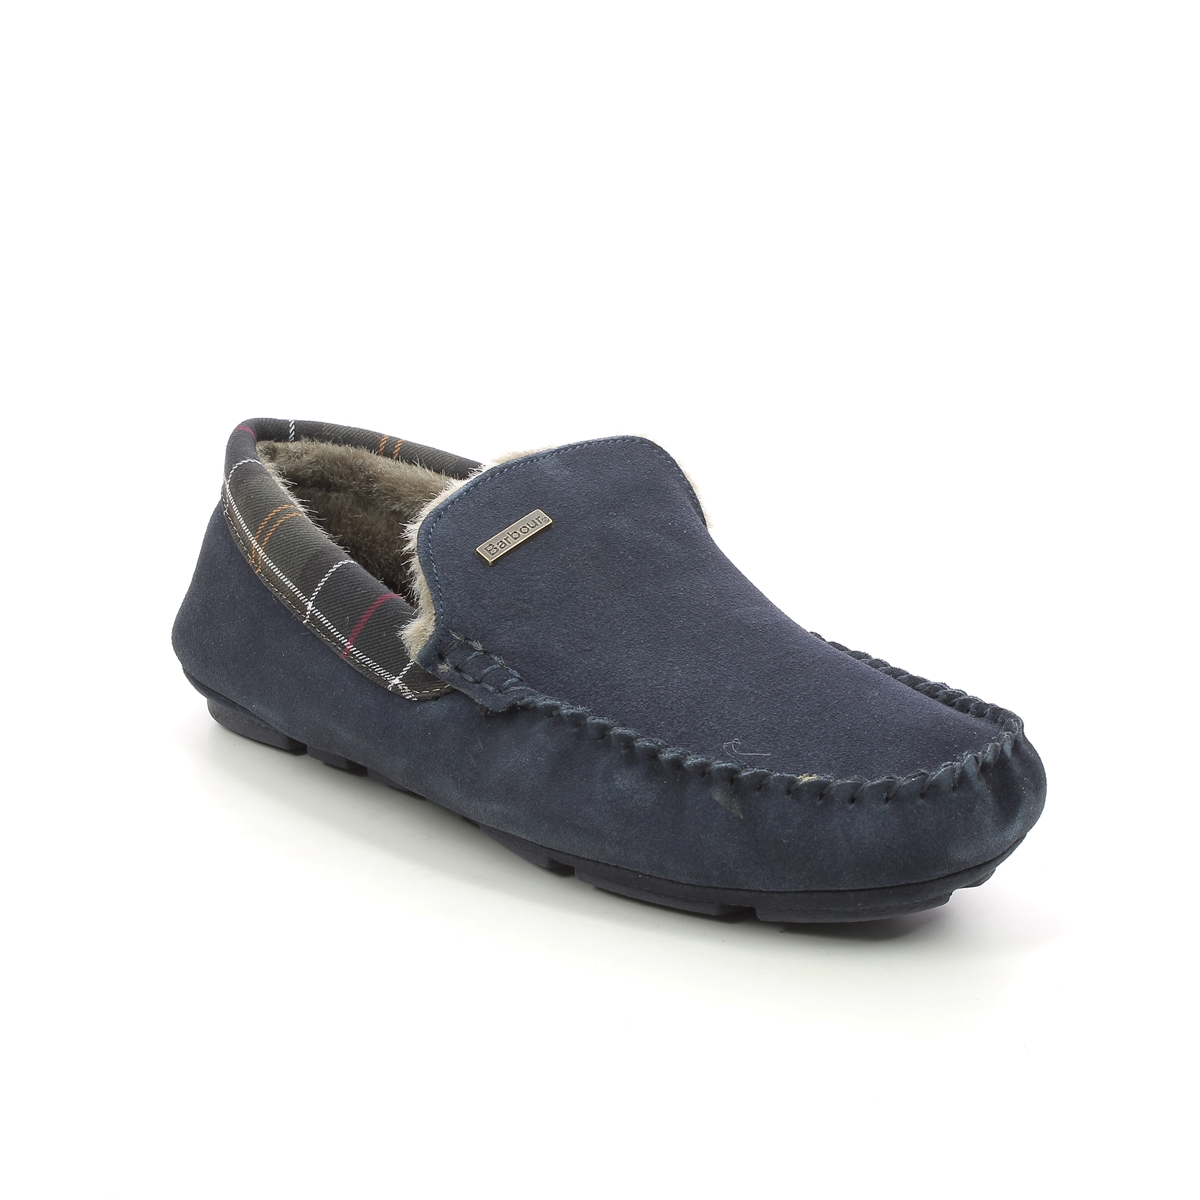 Barbour Monty Navy suede Mens slippers MSL0001-NY52 in a Plain Leather in Size 8